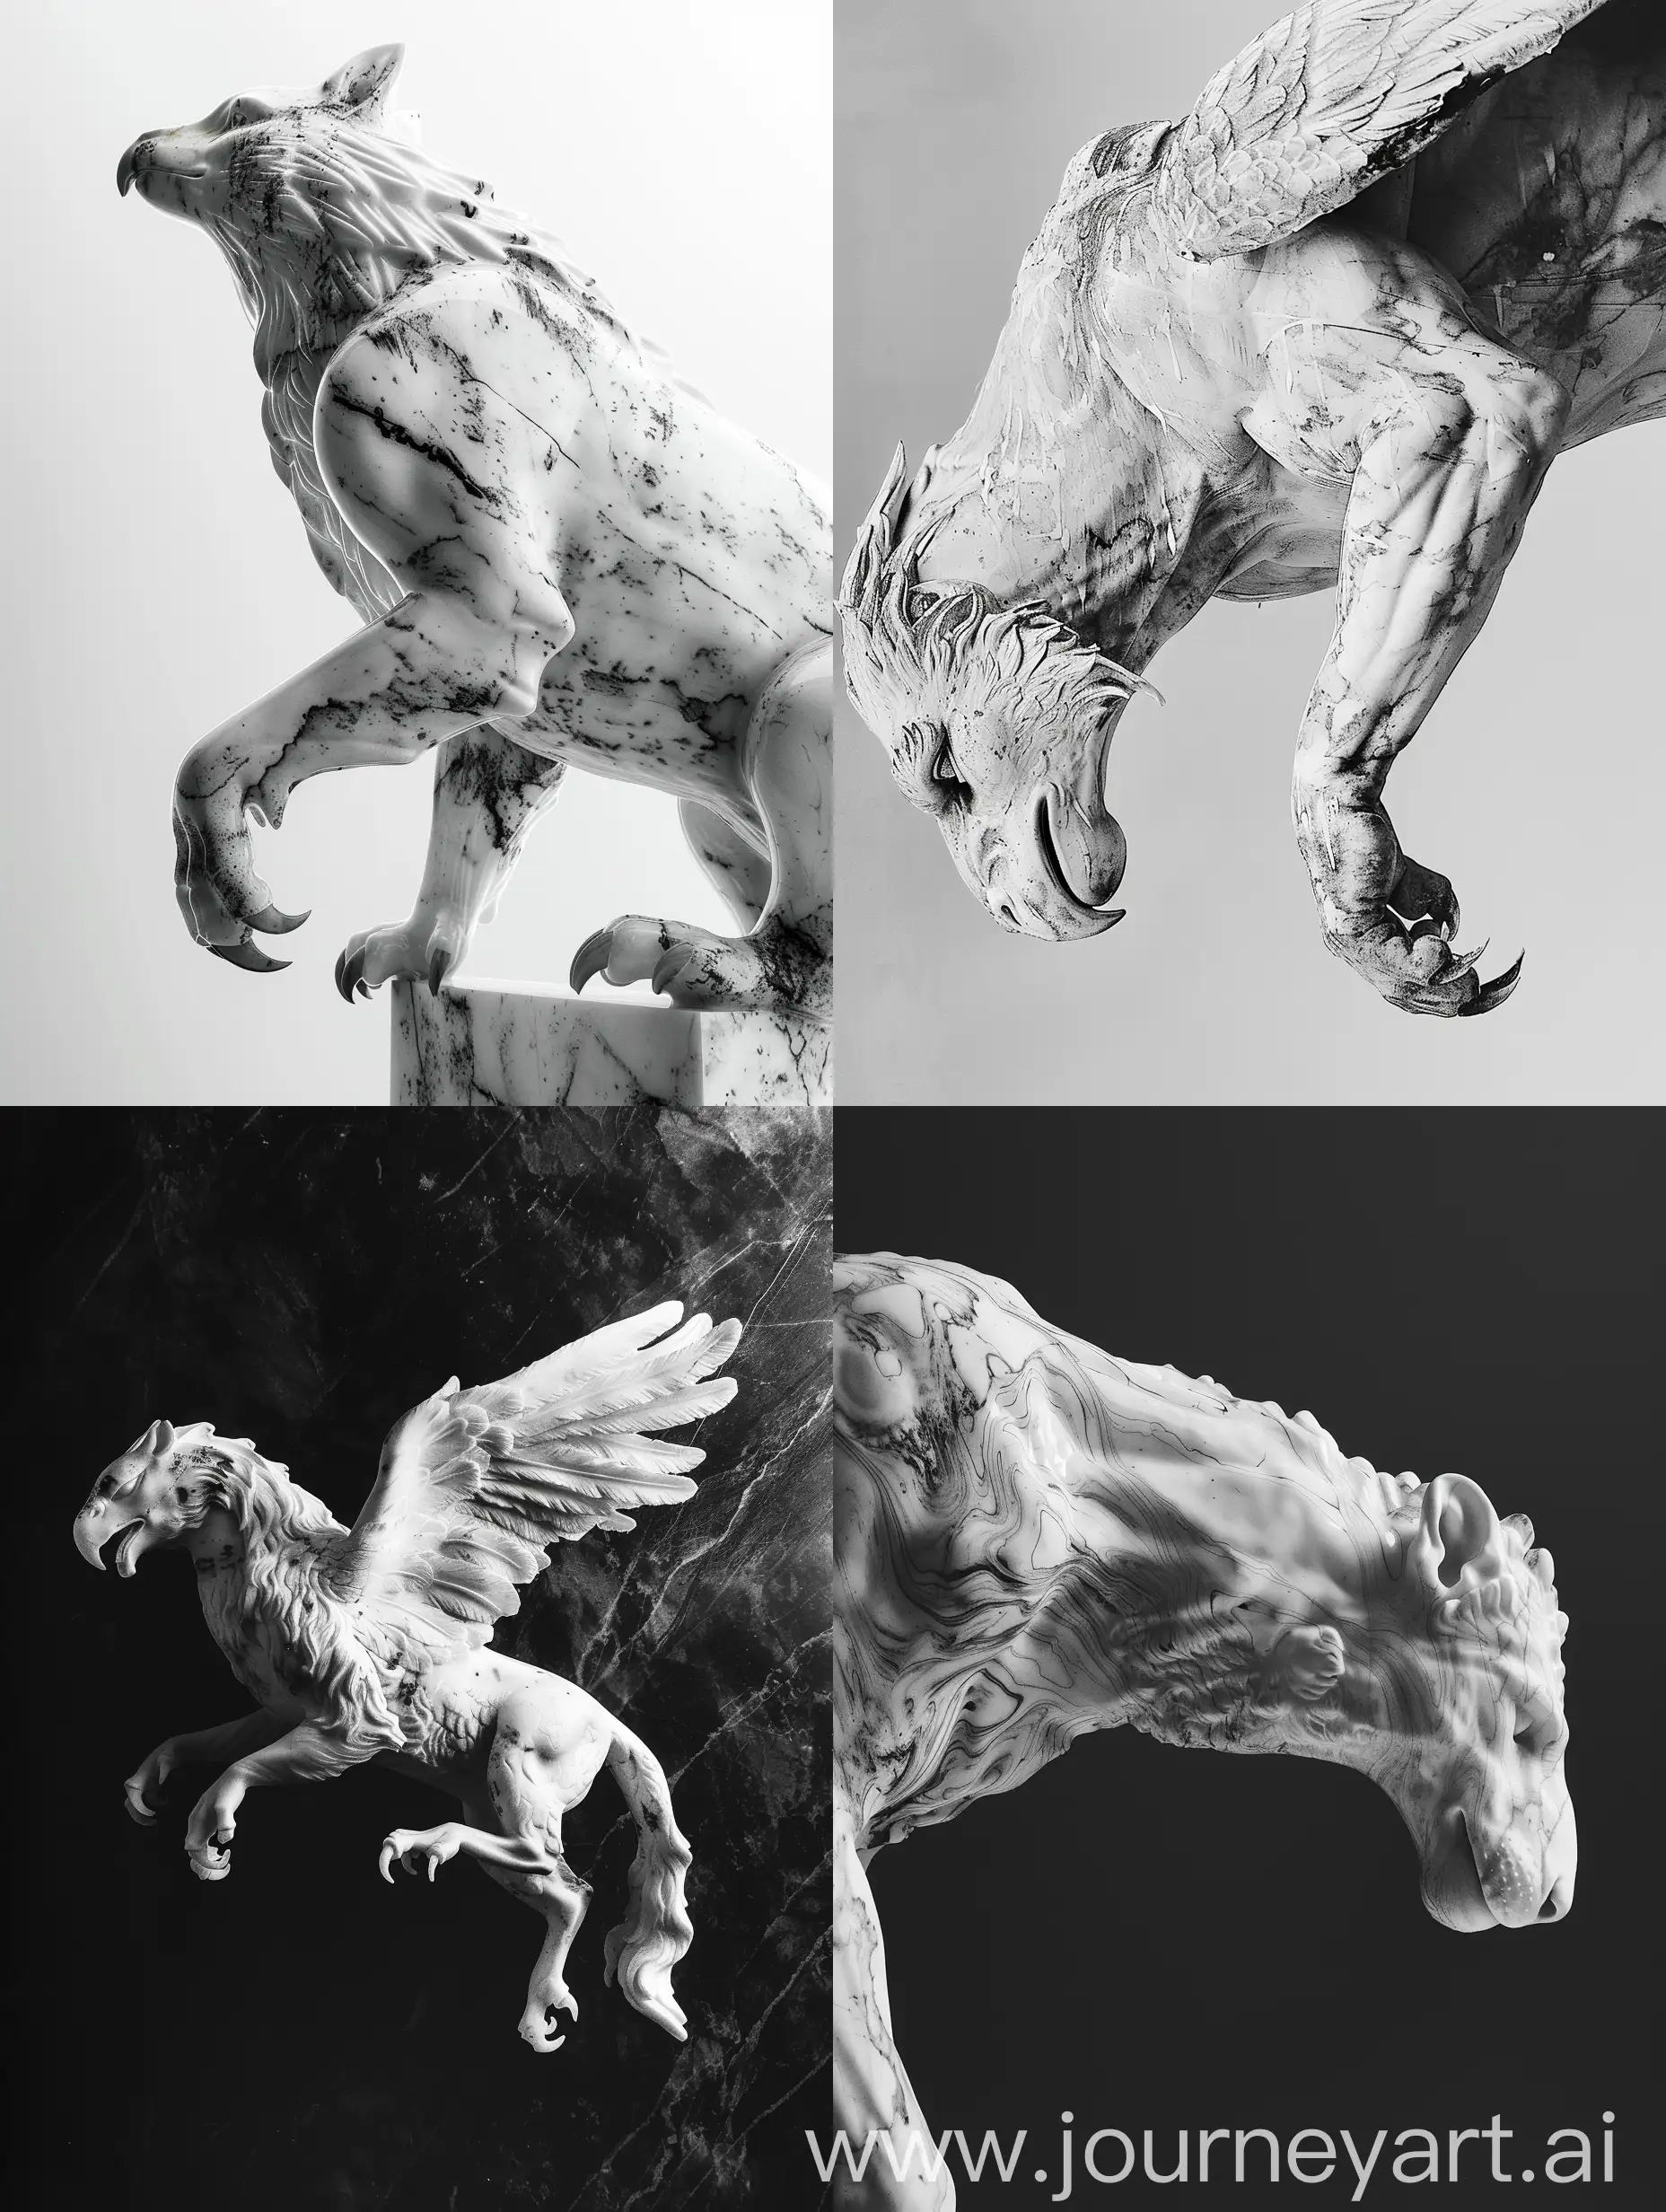 Mythical-Marble-Griffin-Artistic-Photo-with-Porcelain-Skin-and-Alcohol-Black-and-White-Ink